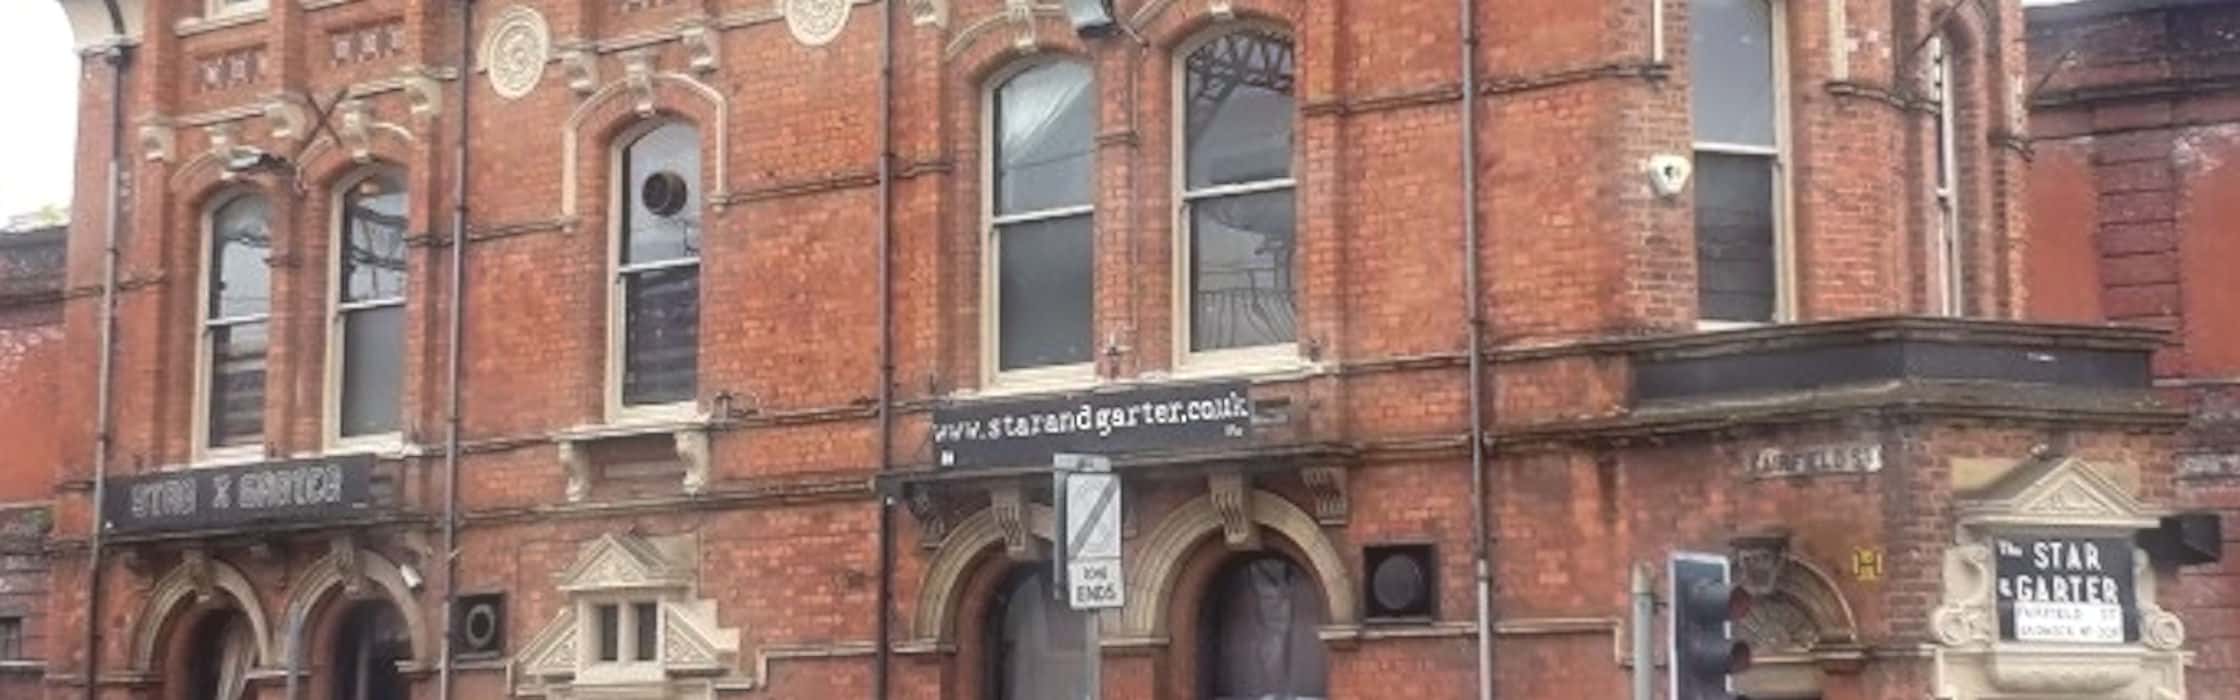 What's On at The Star and Garter, Manchester